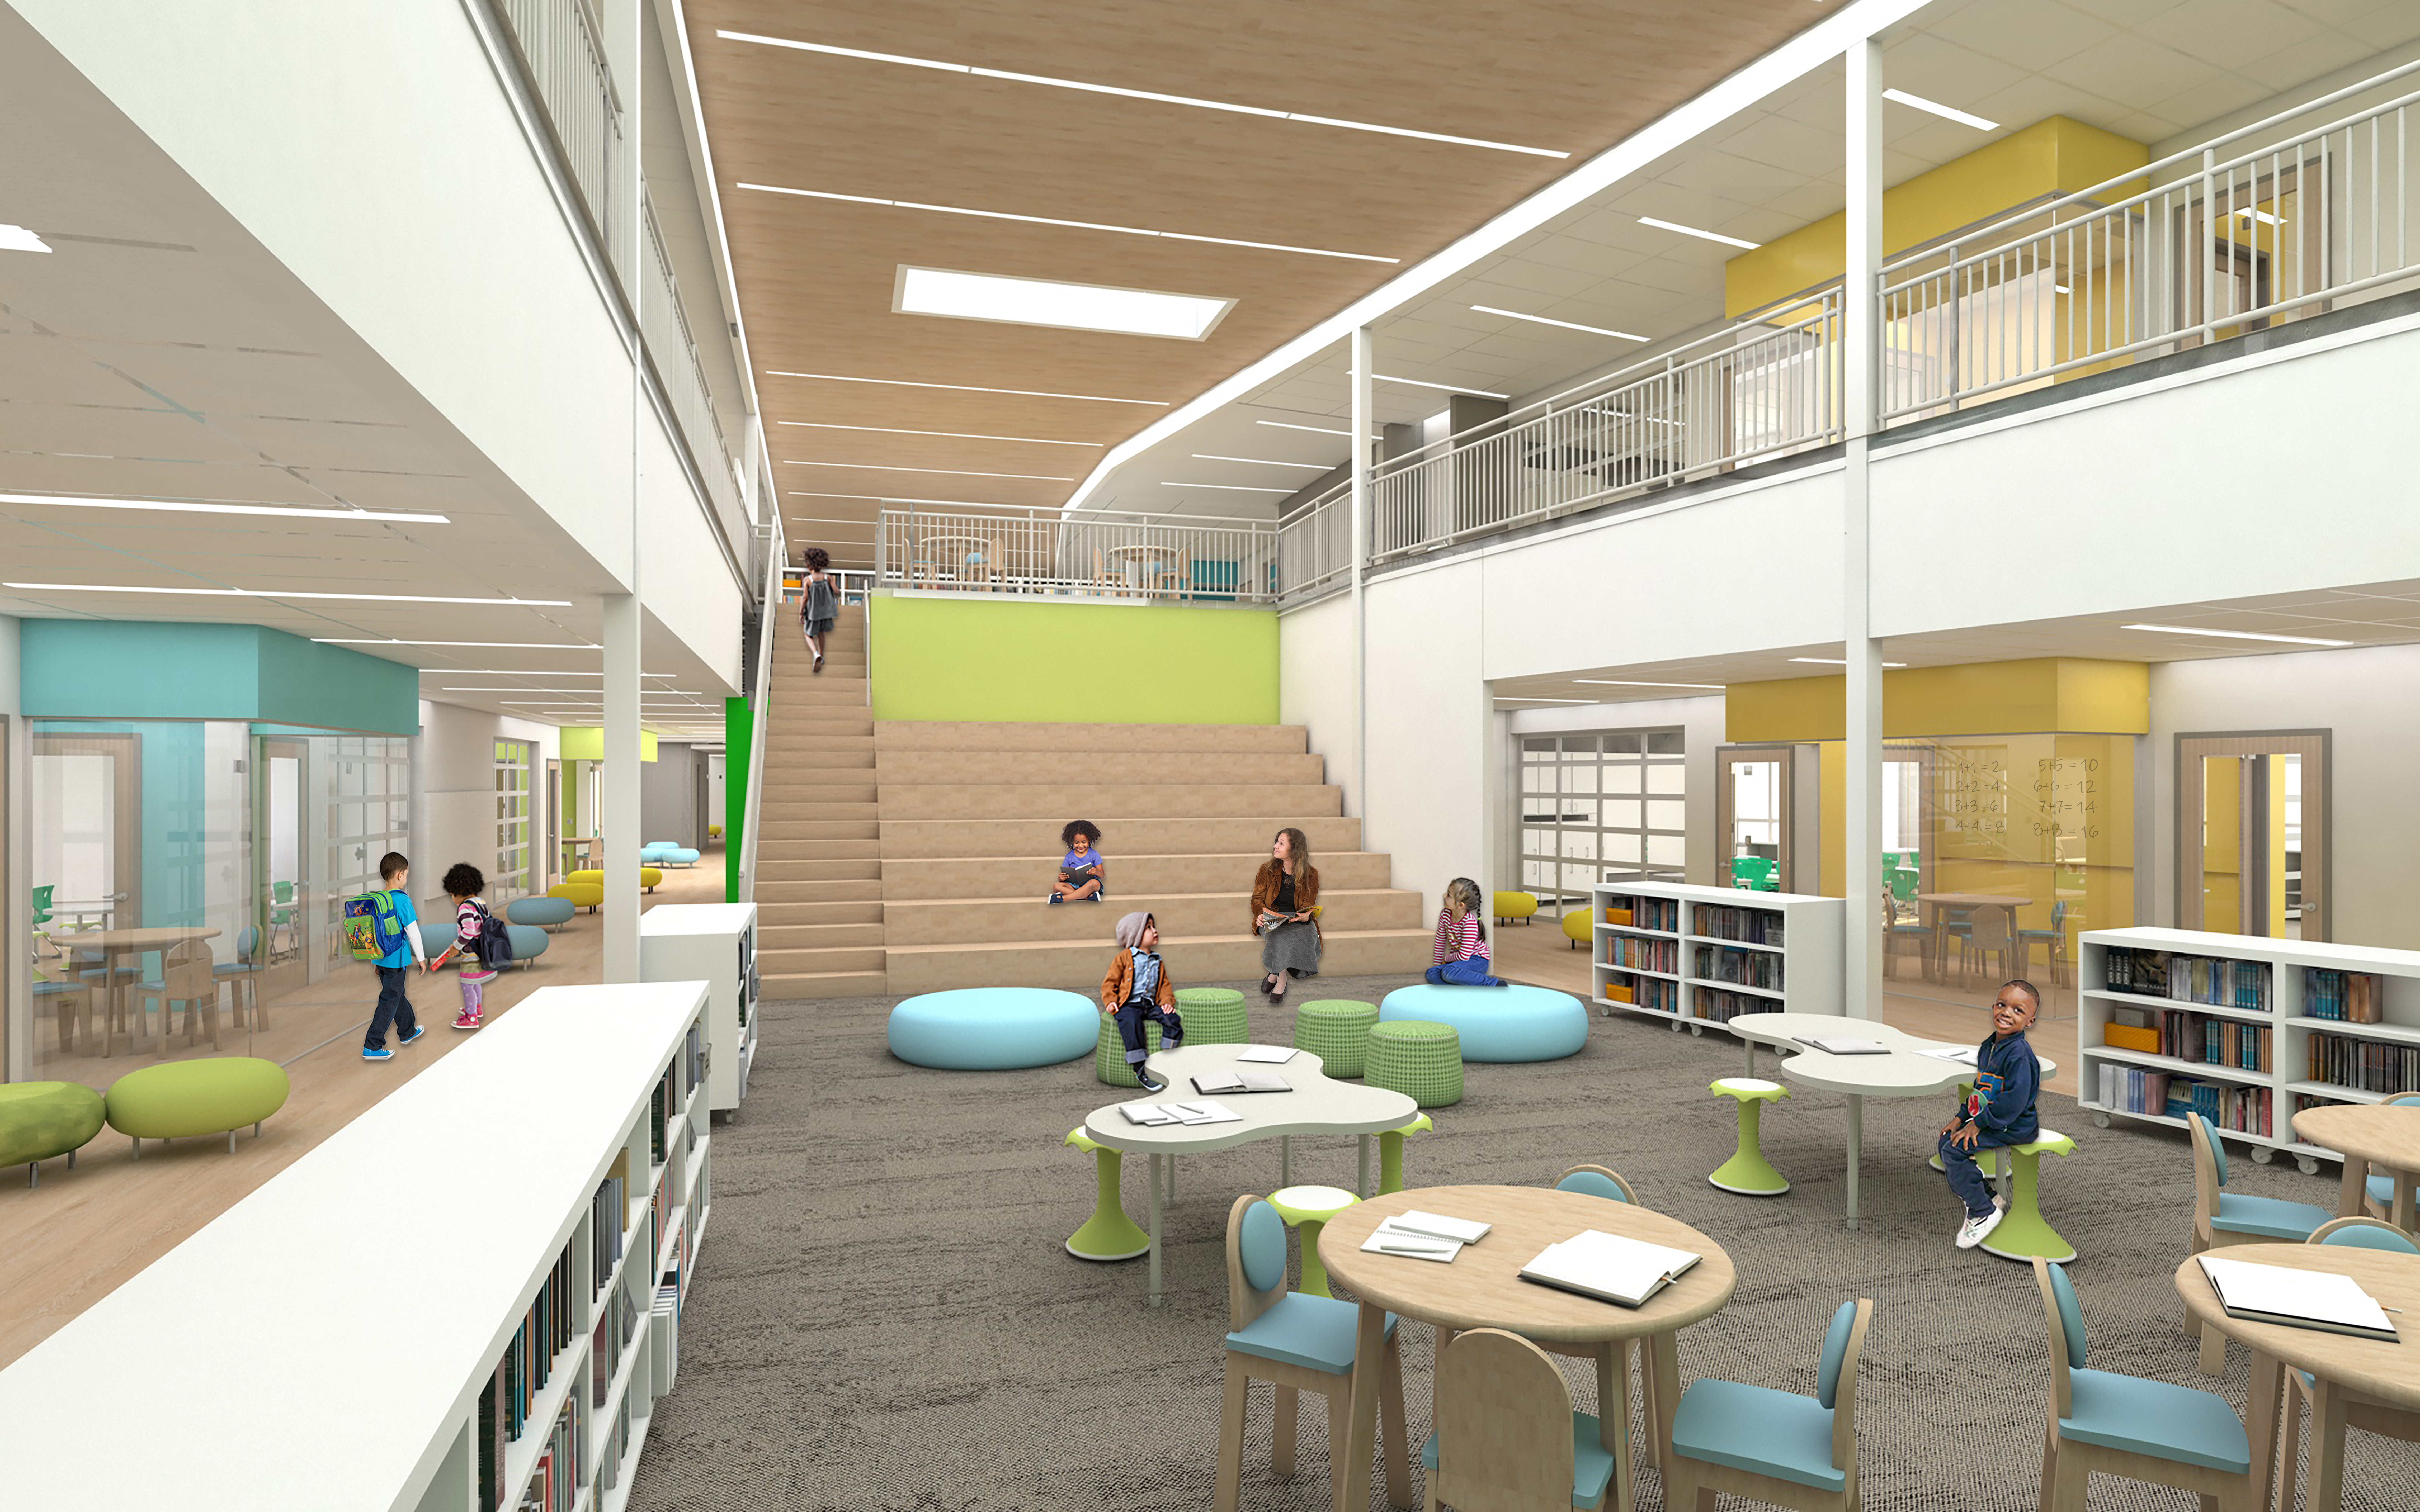 An interior rendering of the Greensview media center with classroom surrounding it on two floors